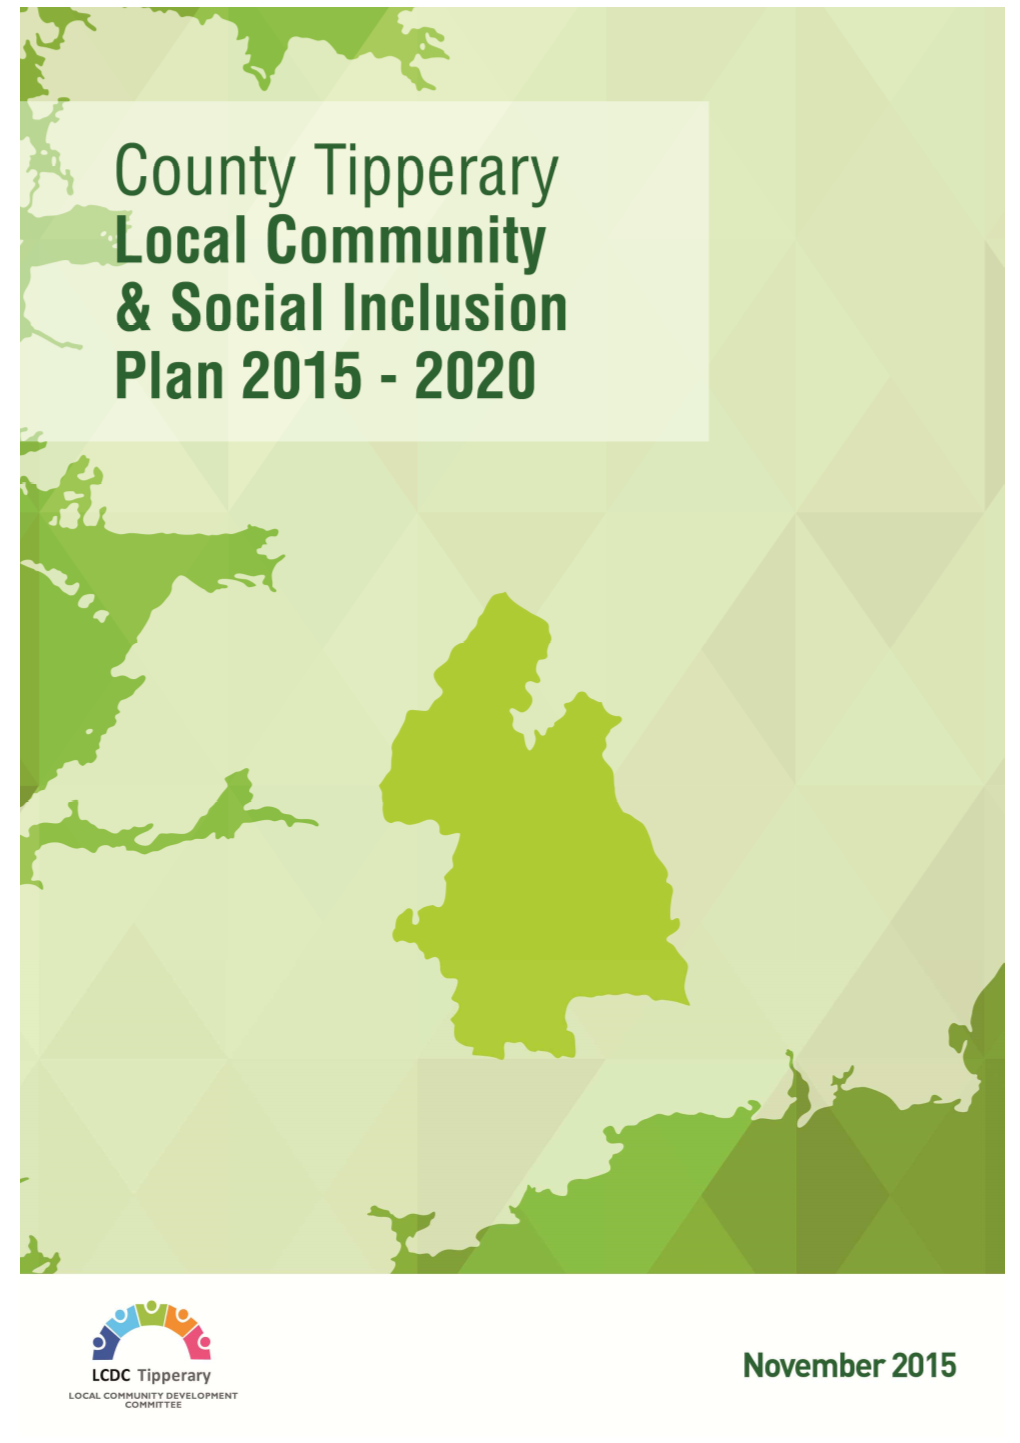 Community and Social Inclusion Plan